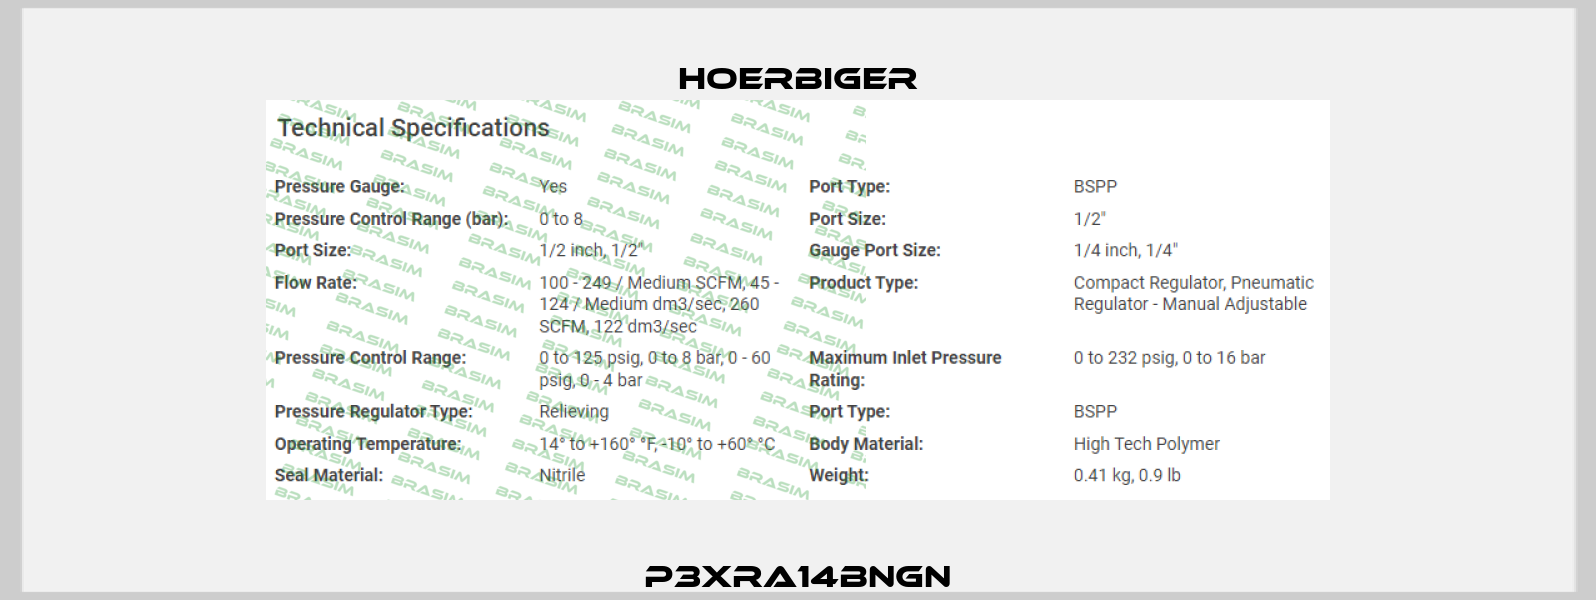 P3XRA14BNGN Hoerbiger